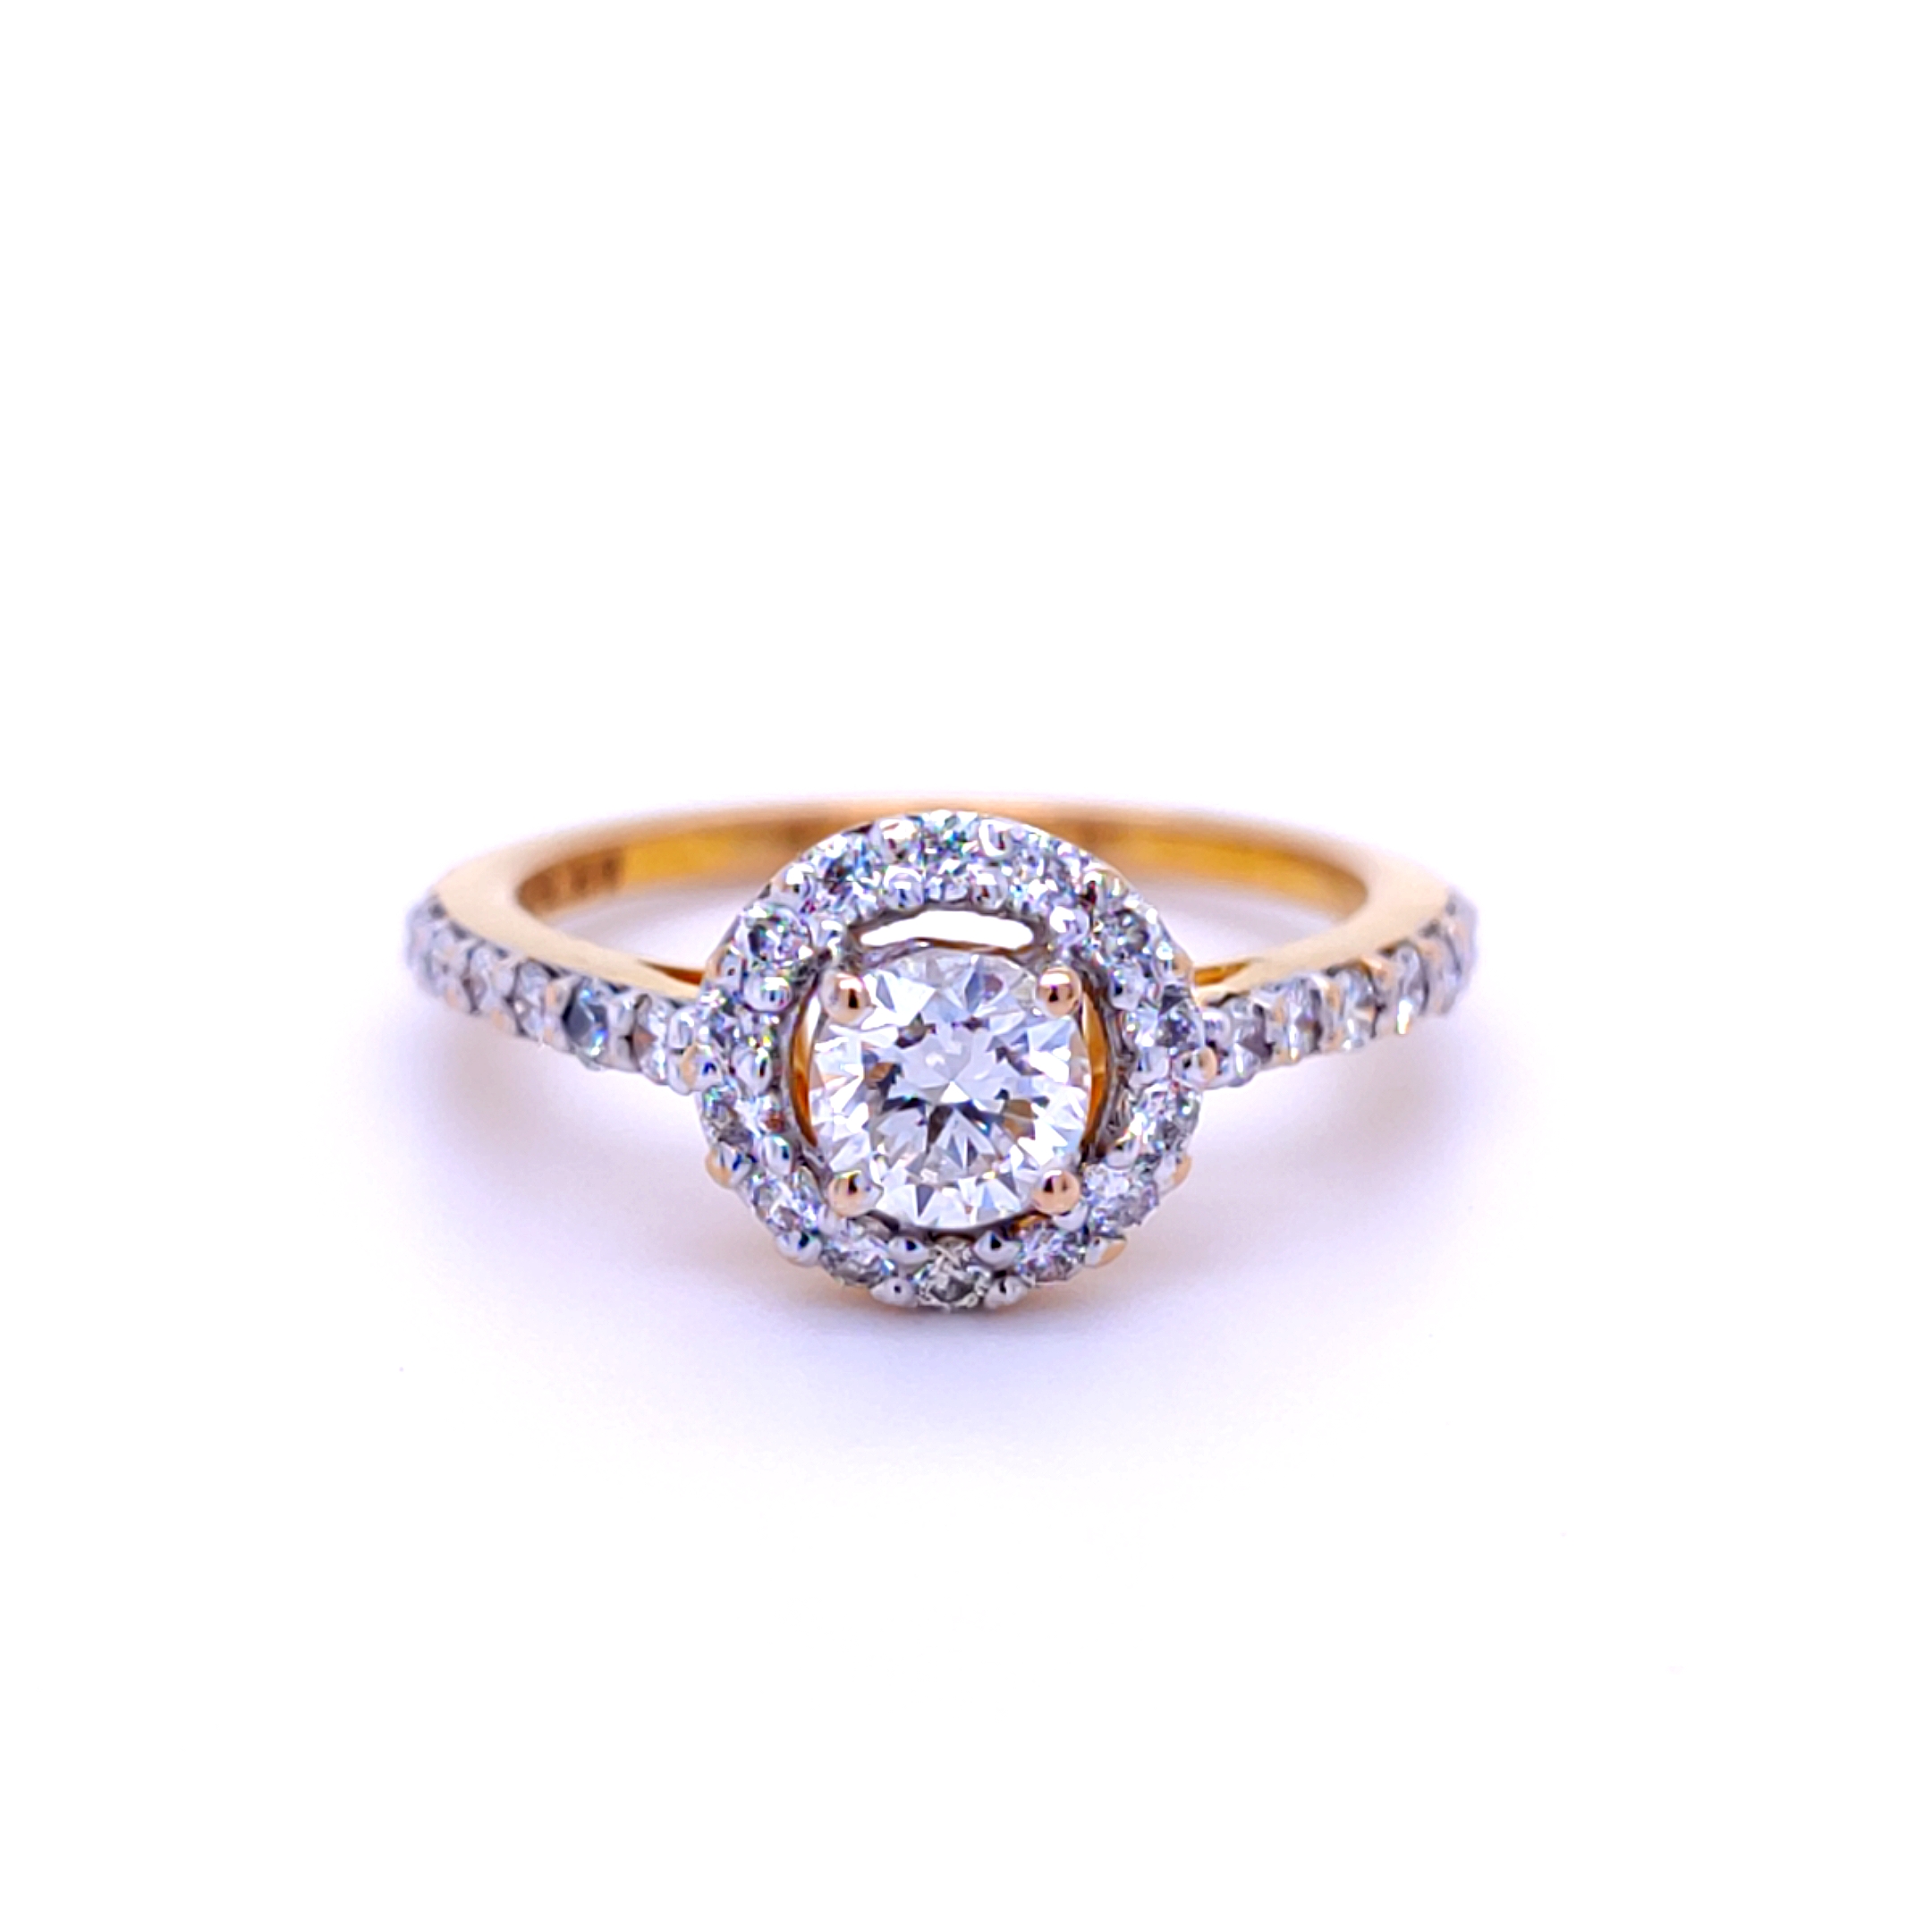 Beautiful solitaire diamond engagement ring in 18kt gold